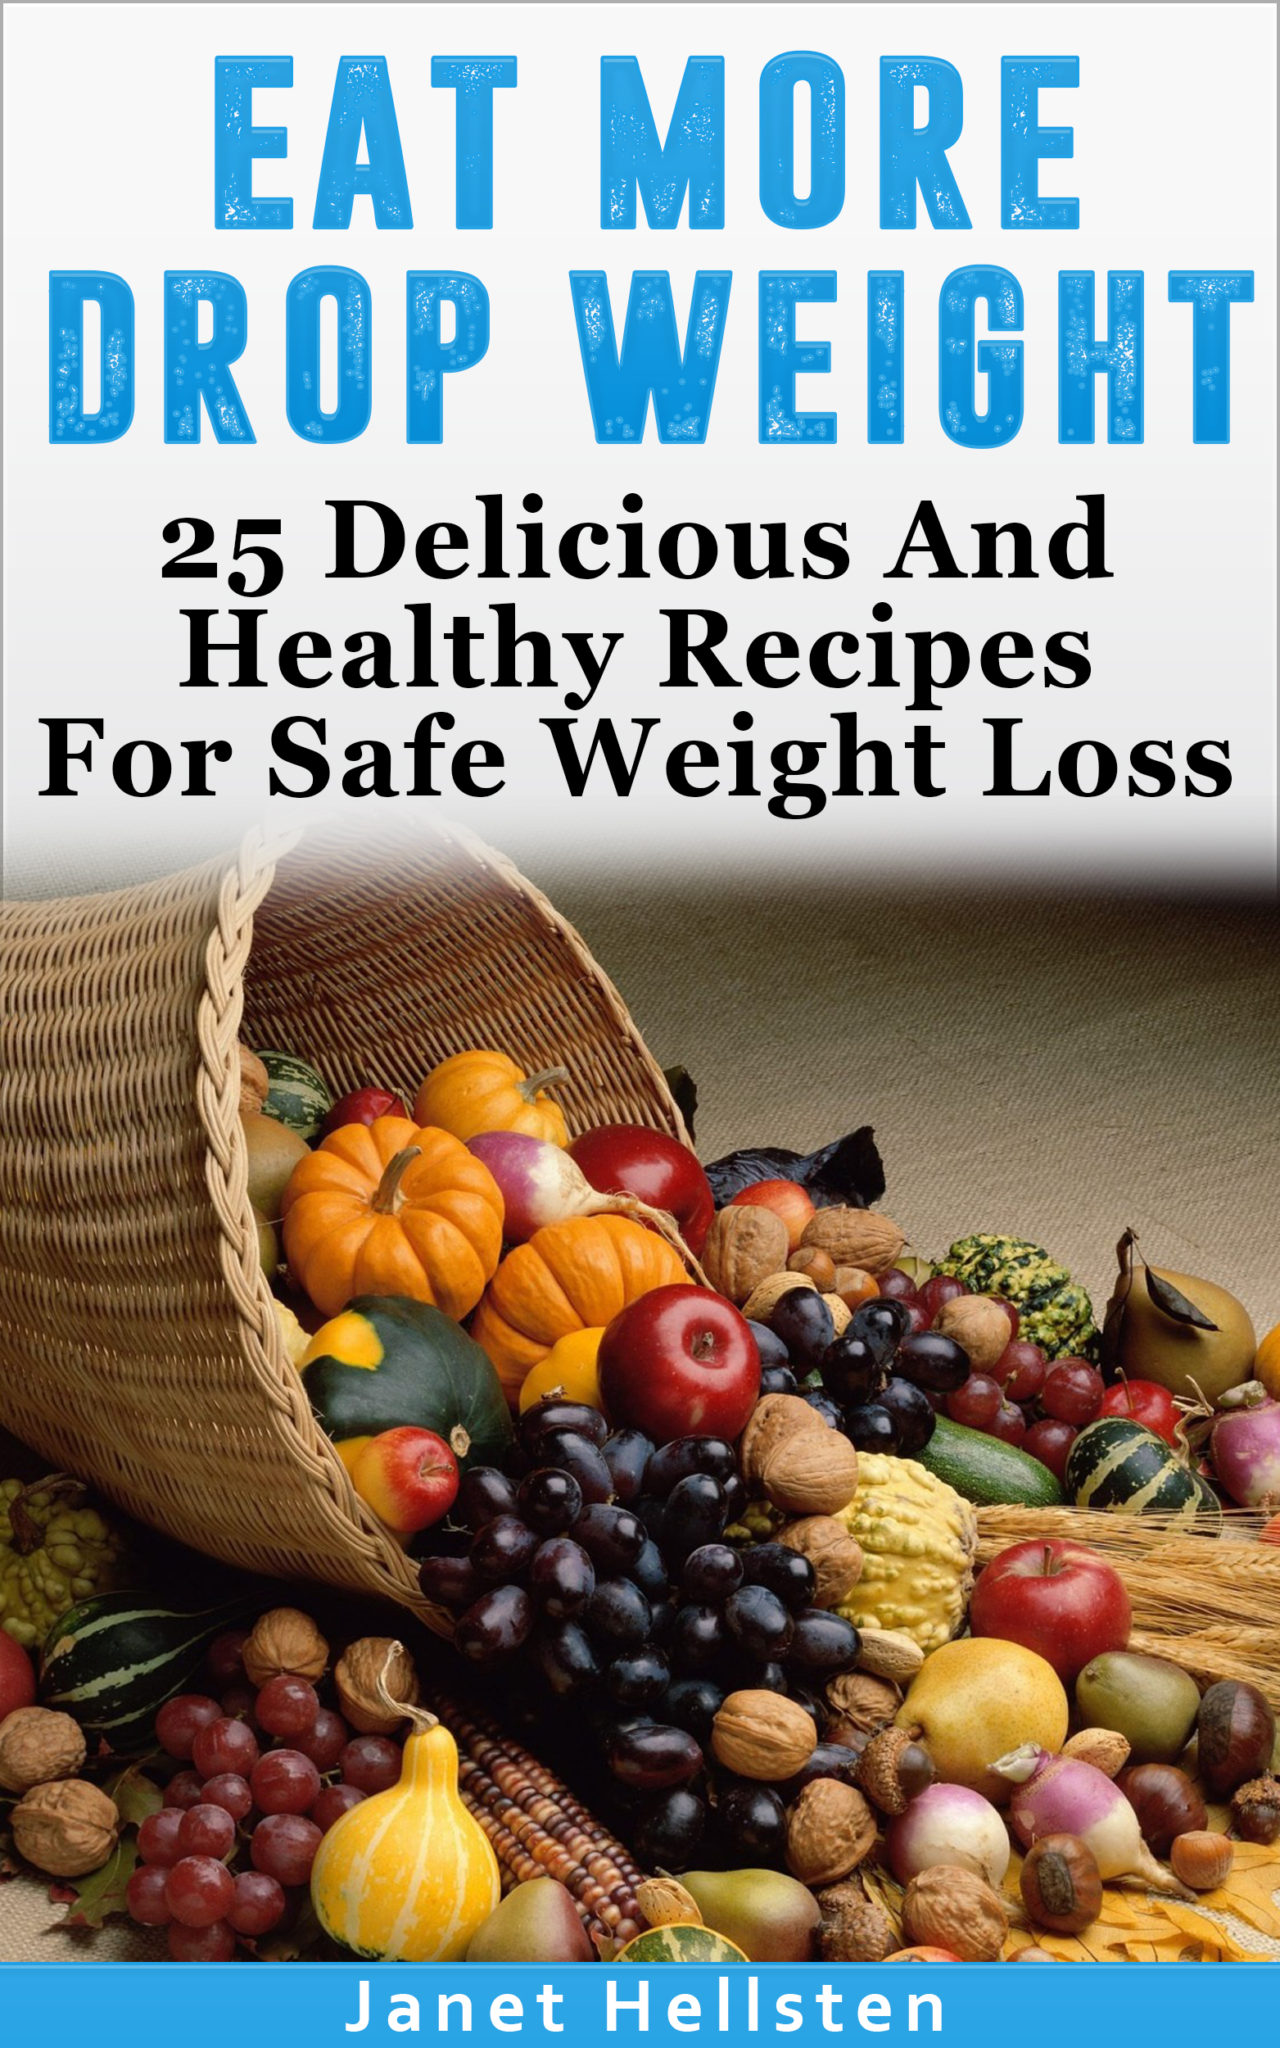 FREE: Eat More Drop Weight by Janet Hellsten